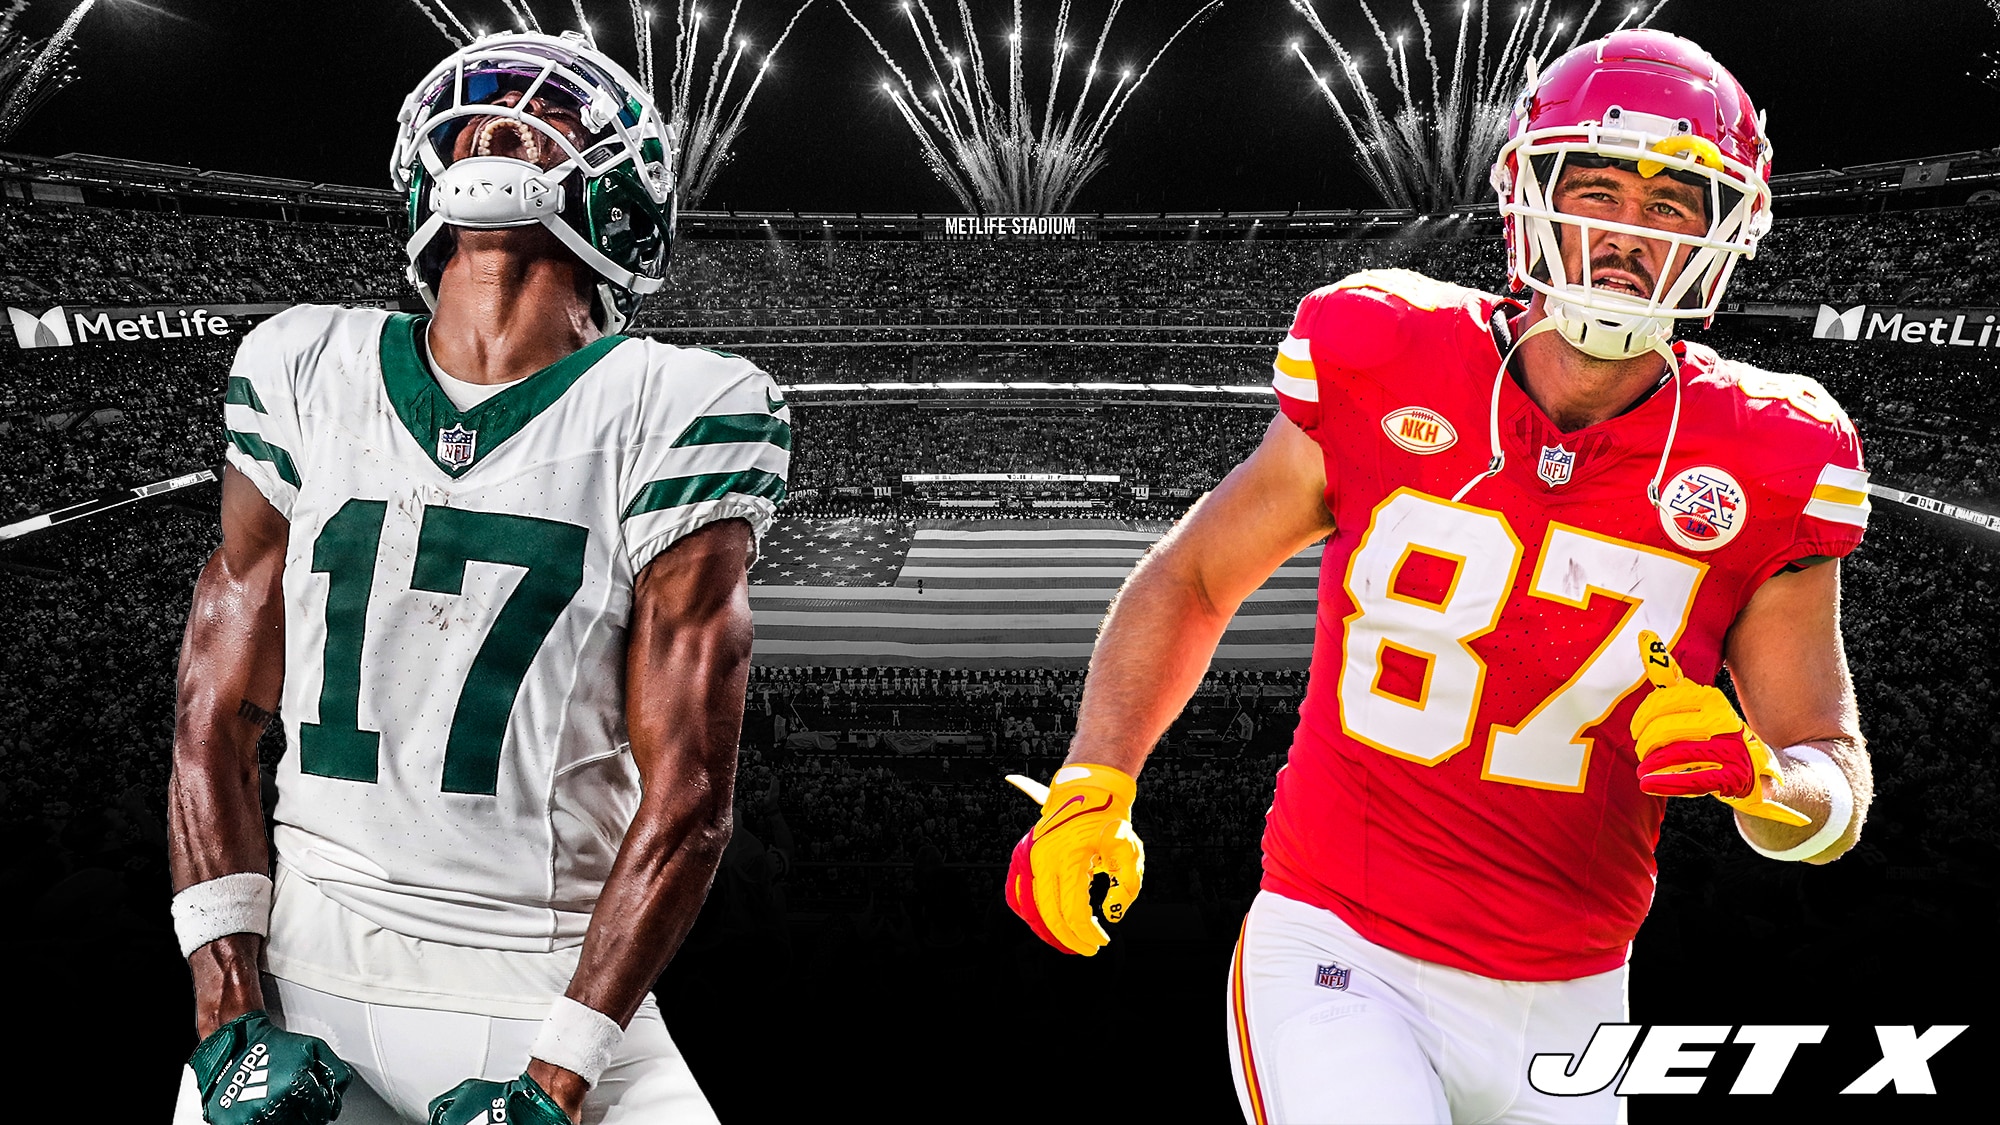 New York Jets vs. Kansas City Chiefs, Week 4 preview Time to attack